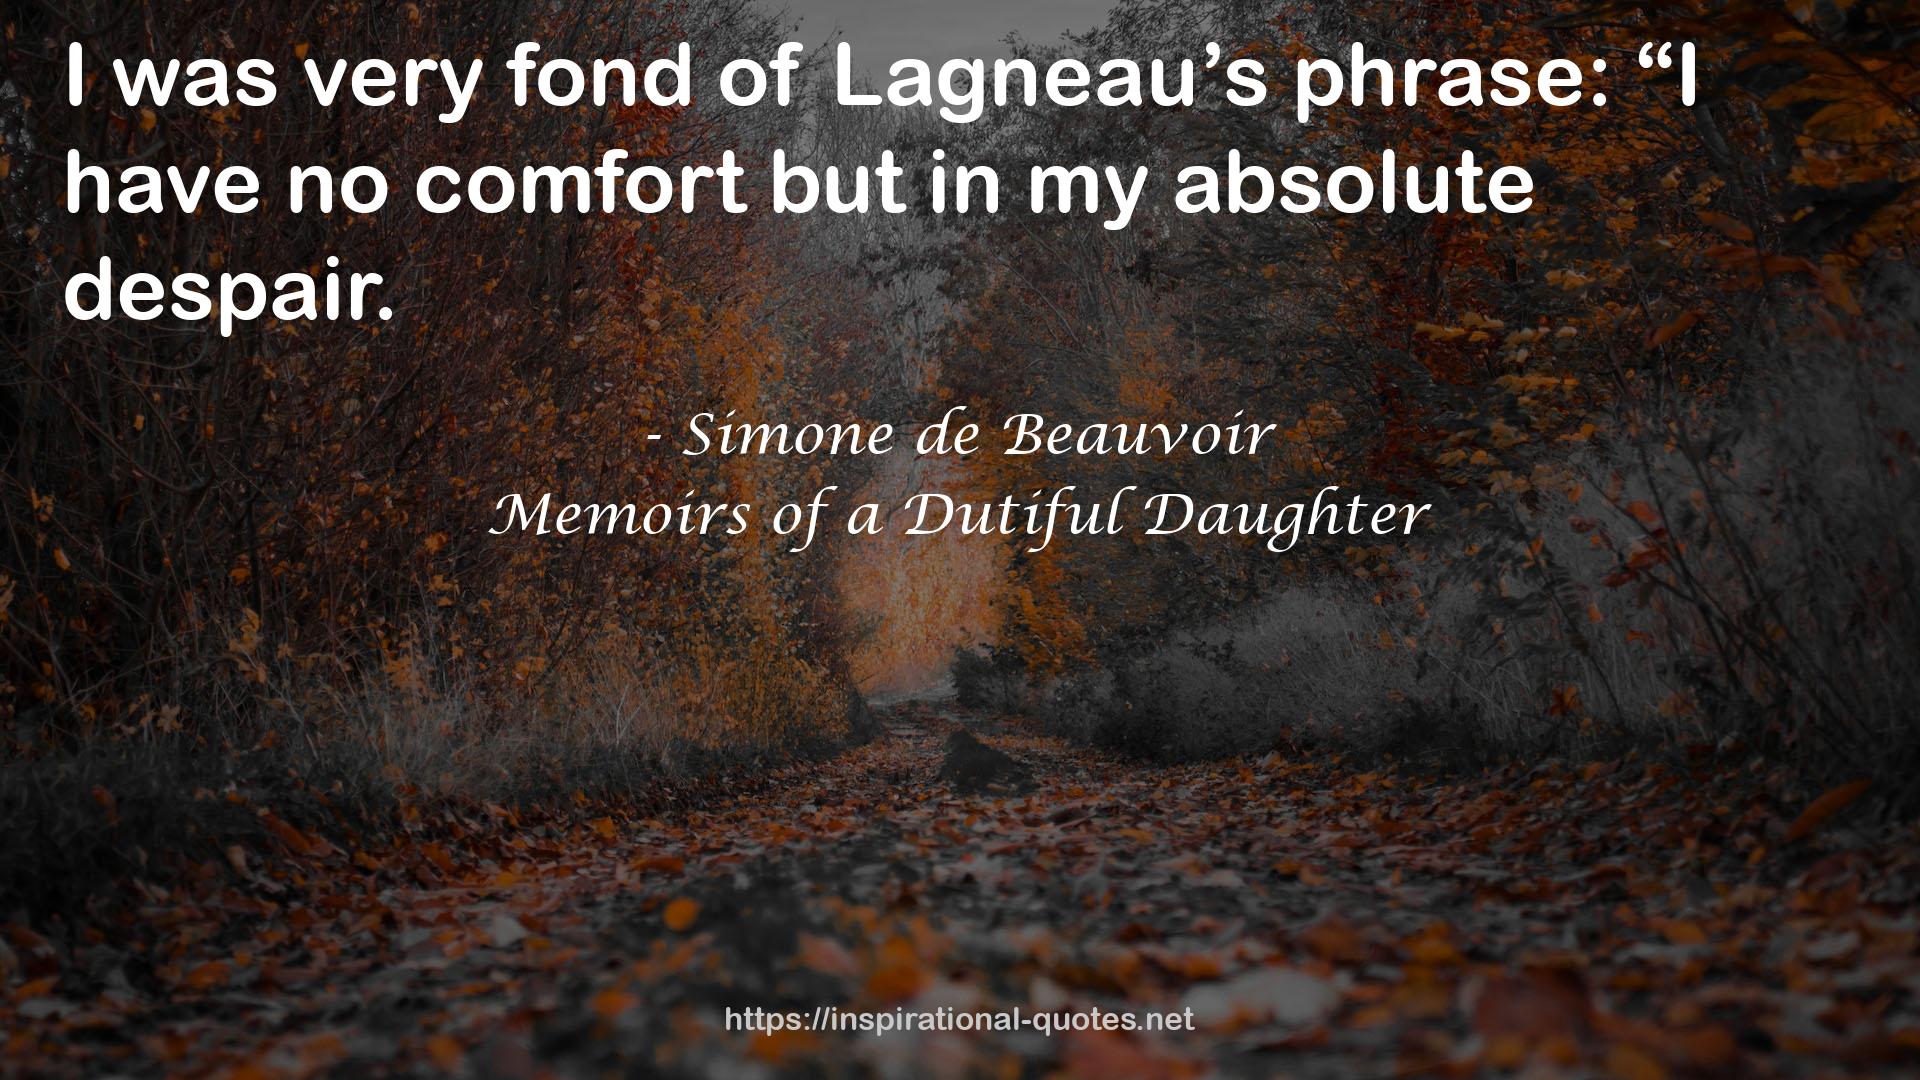 Memoirs of a Dutiful Daughter QUOTES